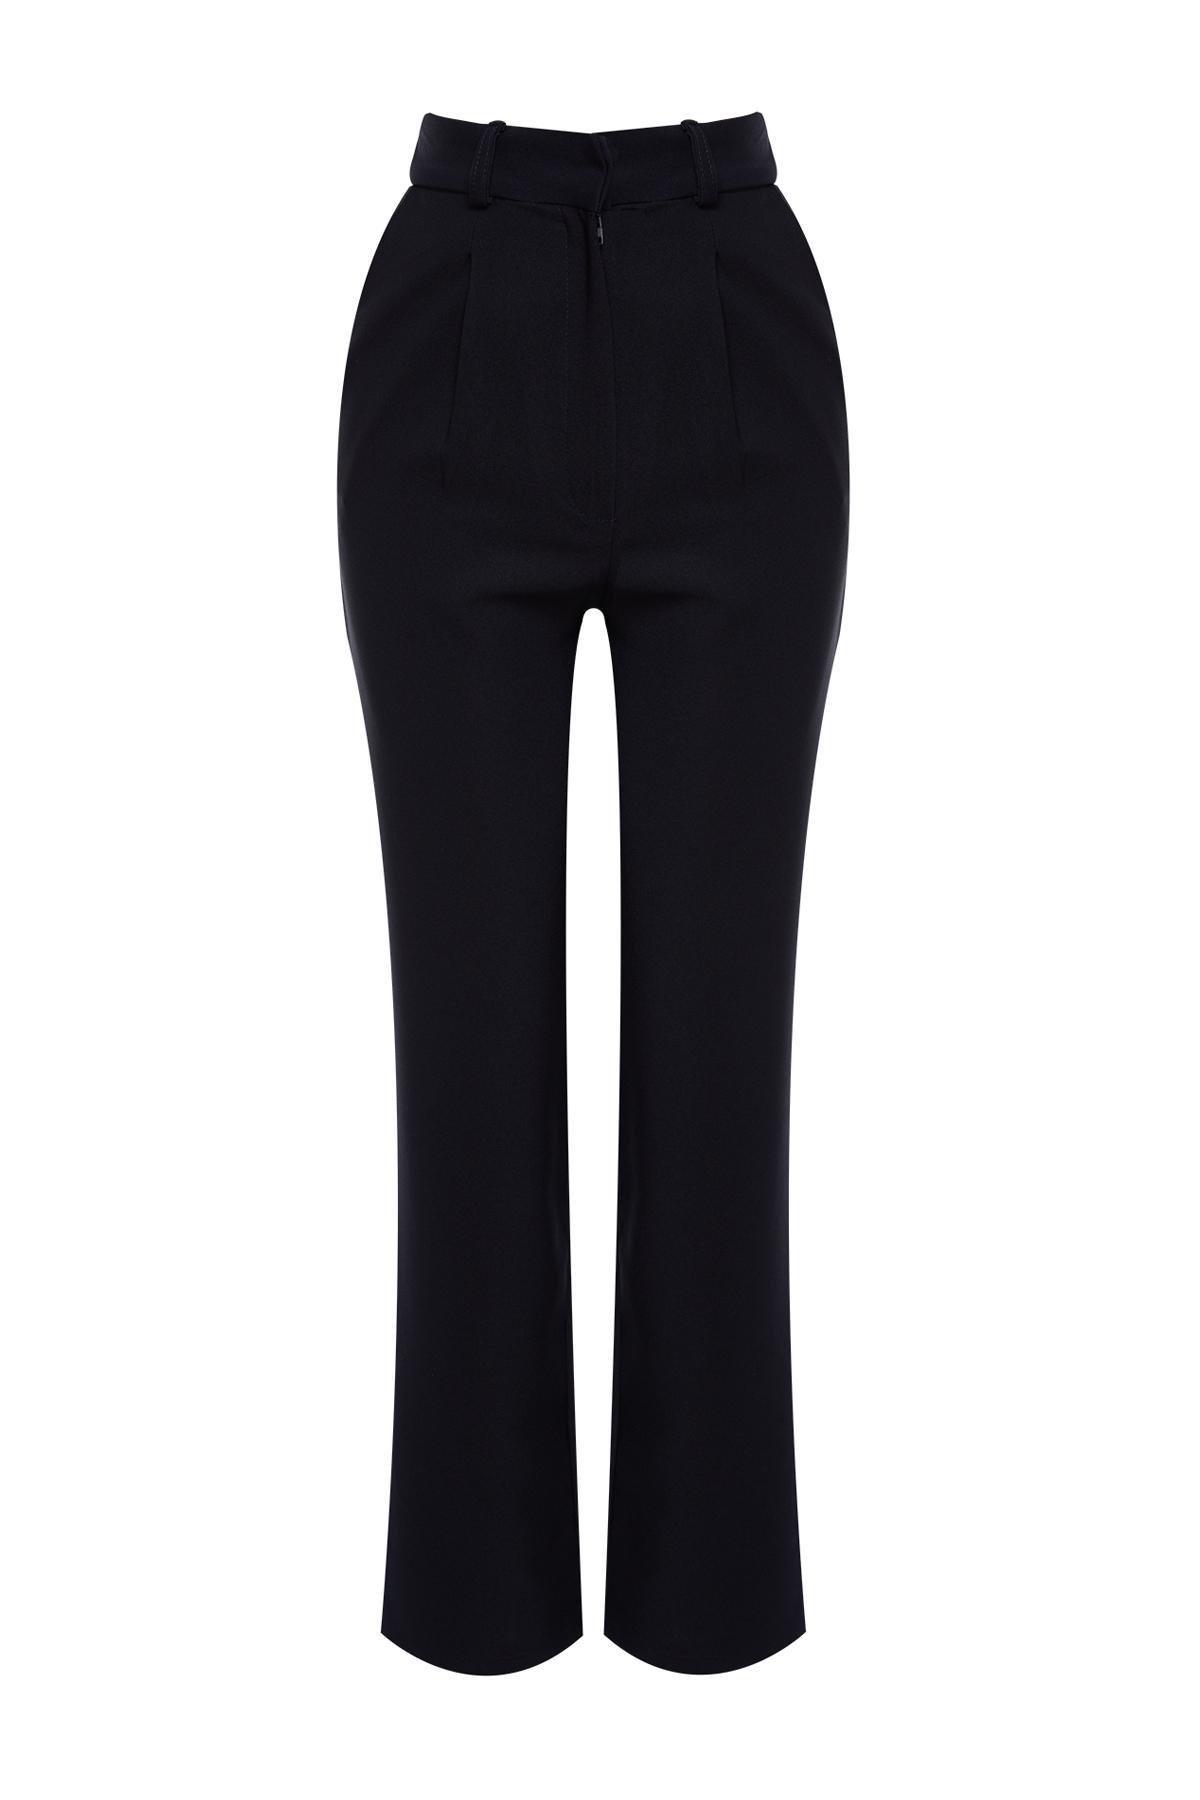 Trendyol - Blue Straight Cut Pleated Trousers